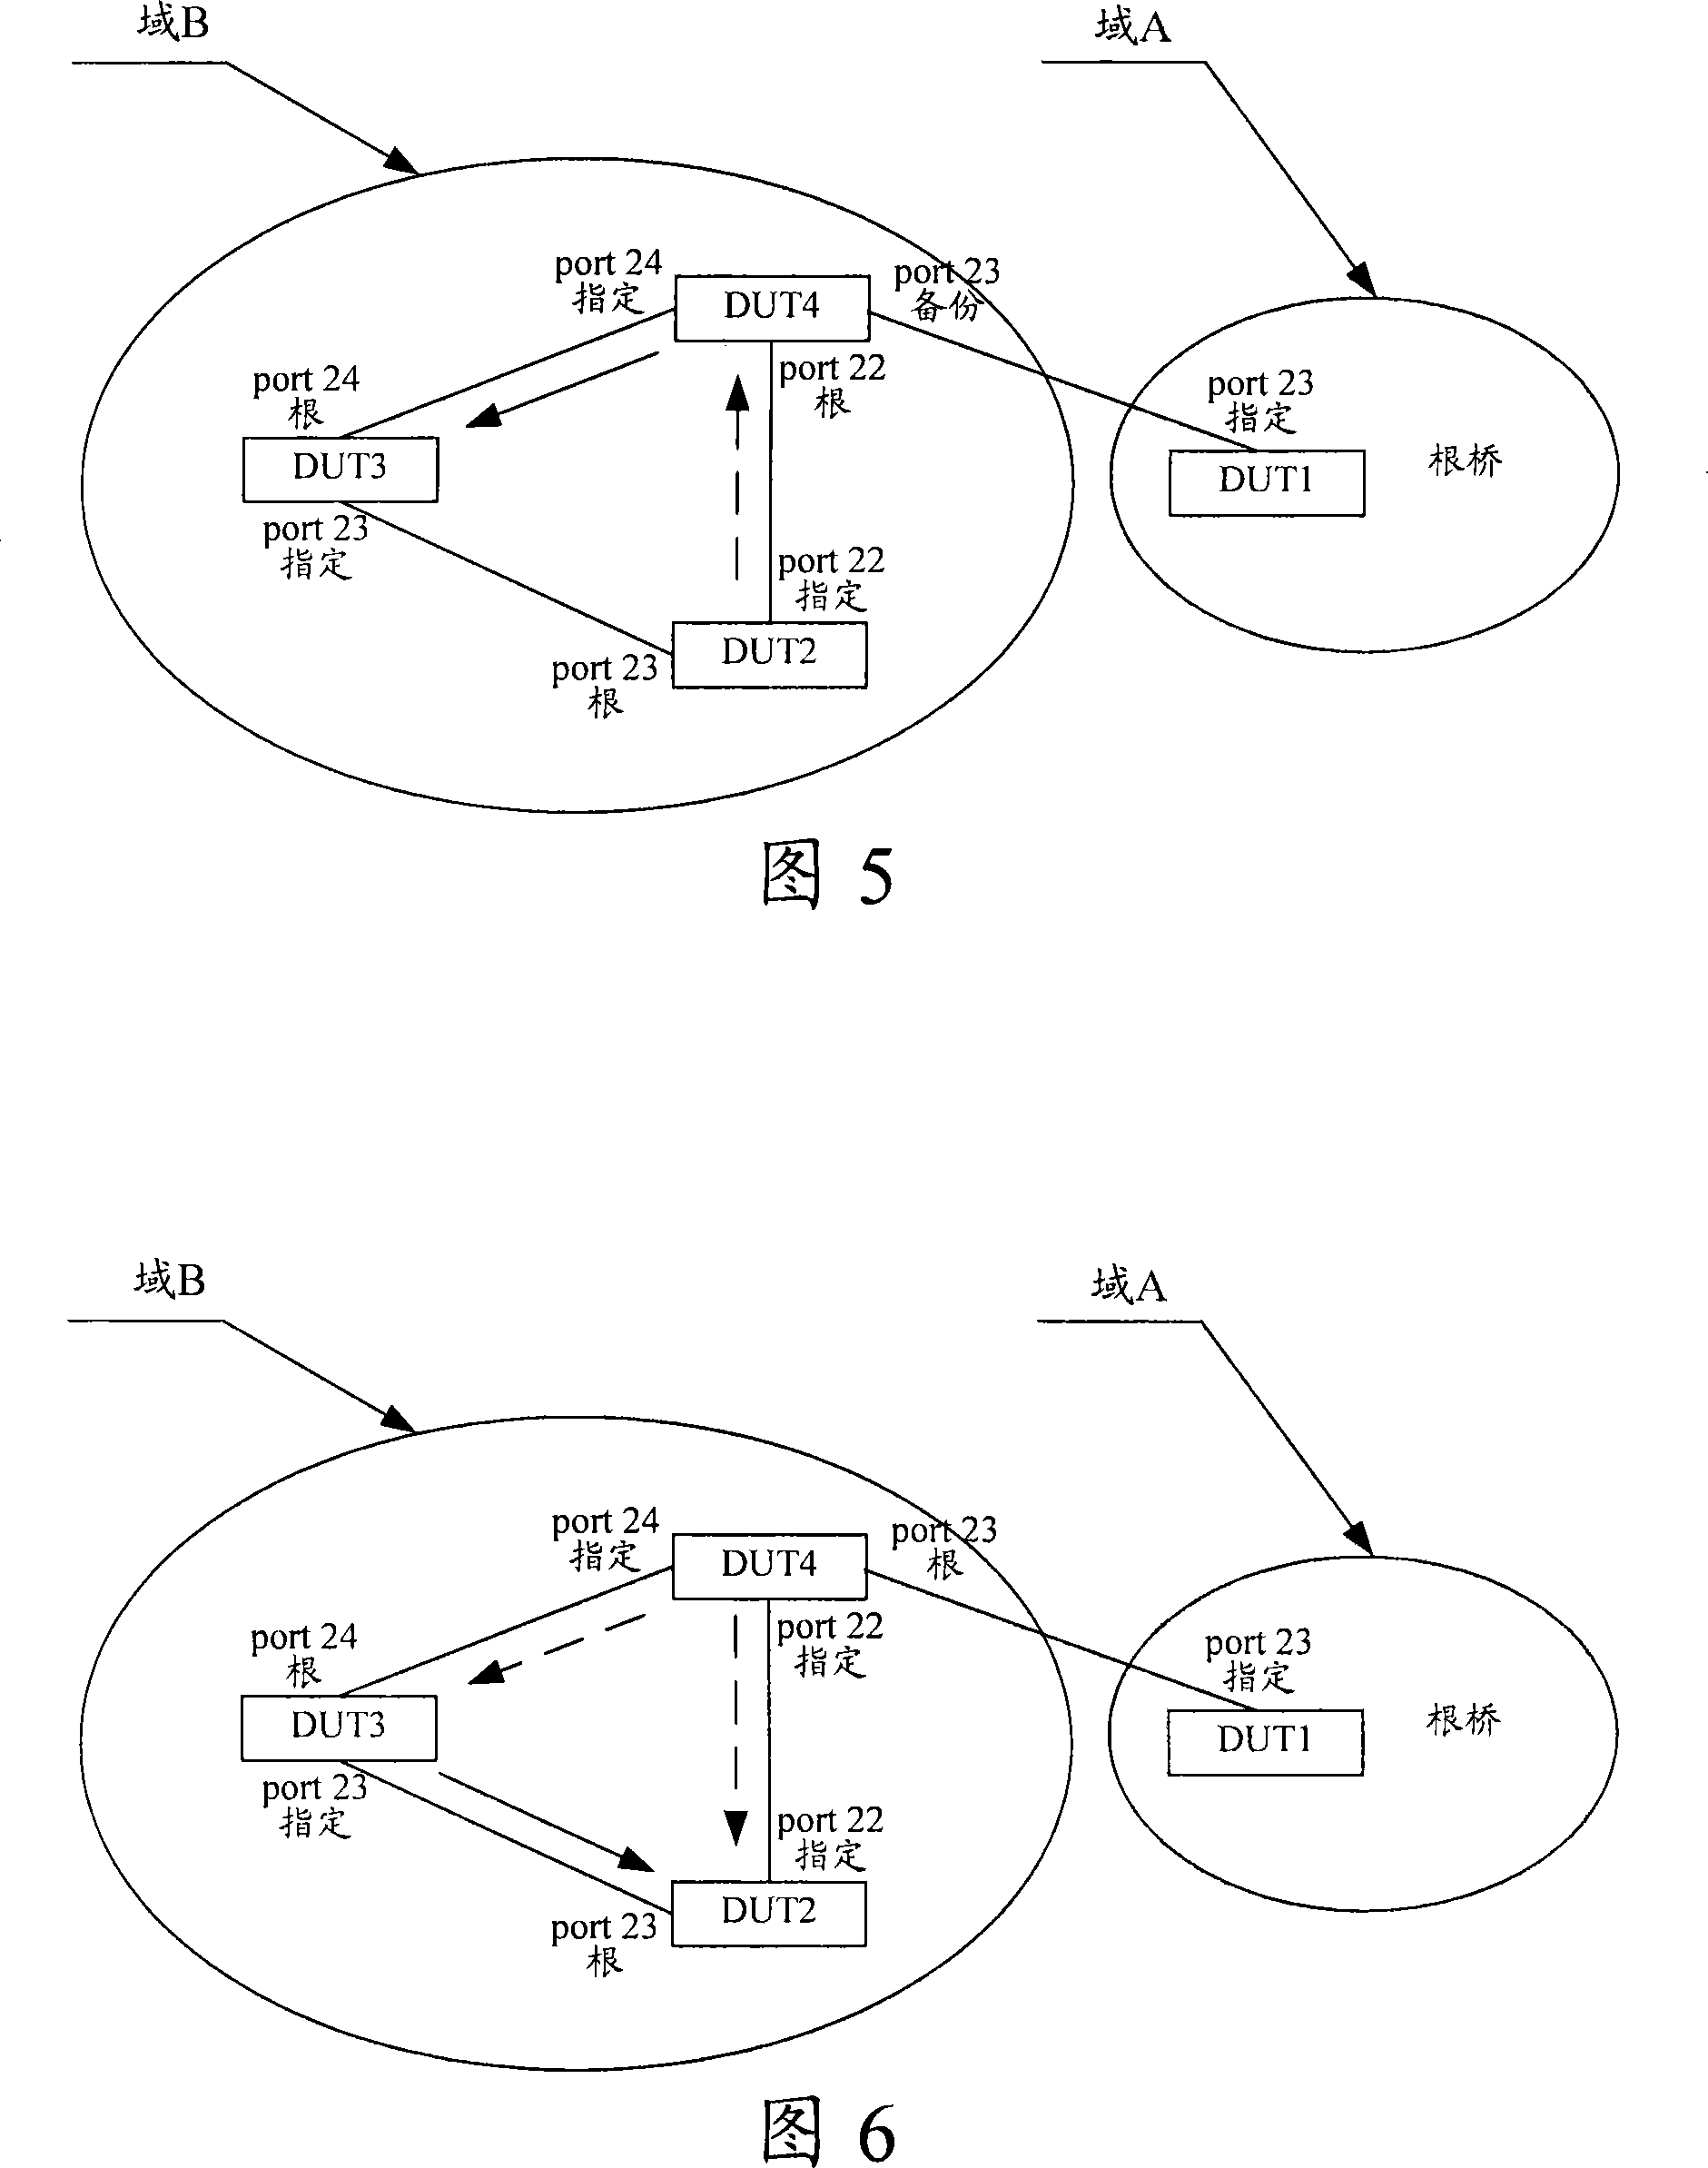 Equipment and method for speeding up poly spanning tree protocol network topological convergence